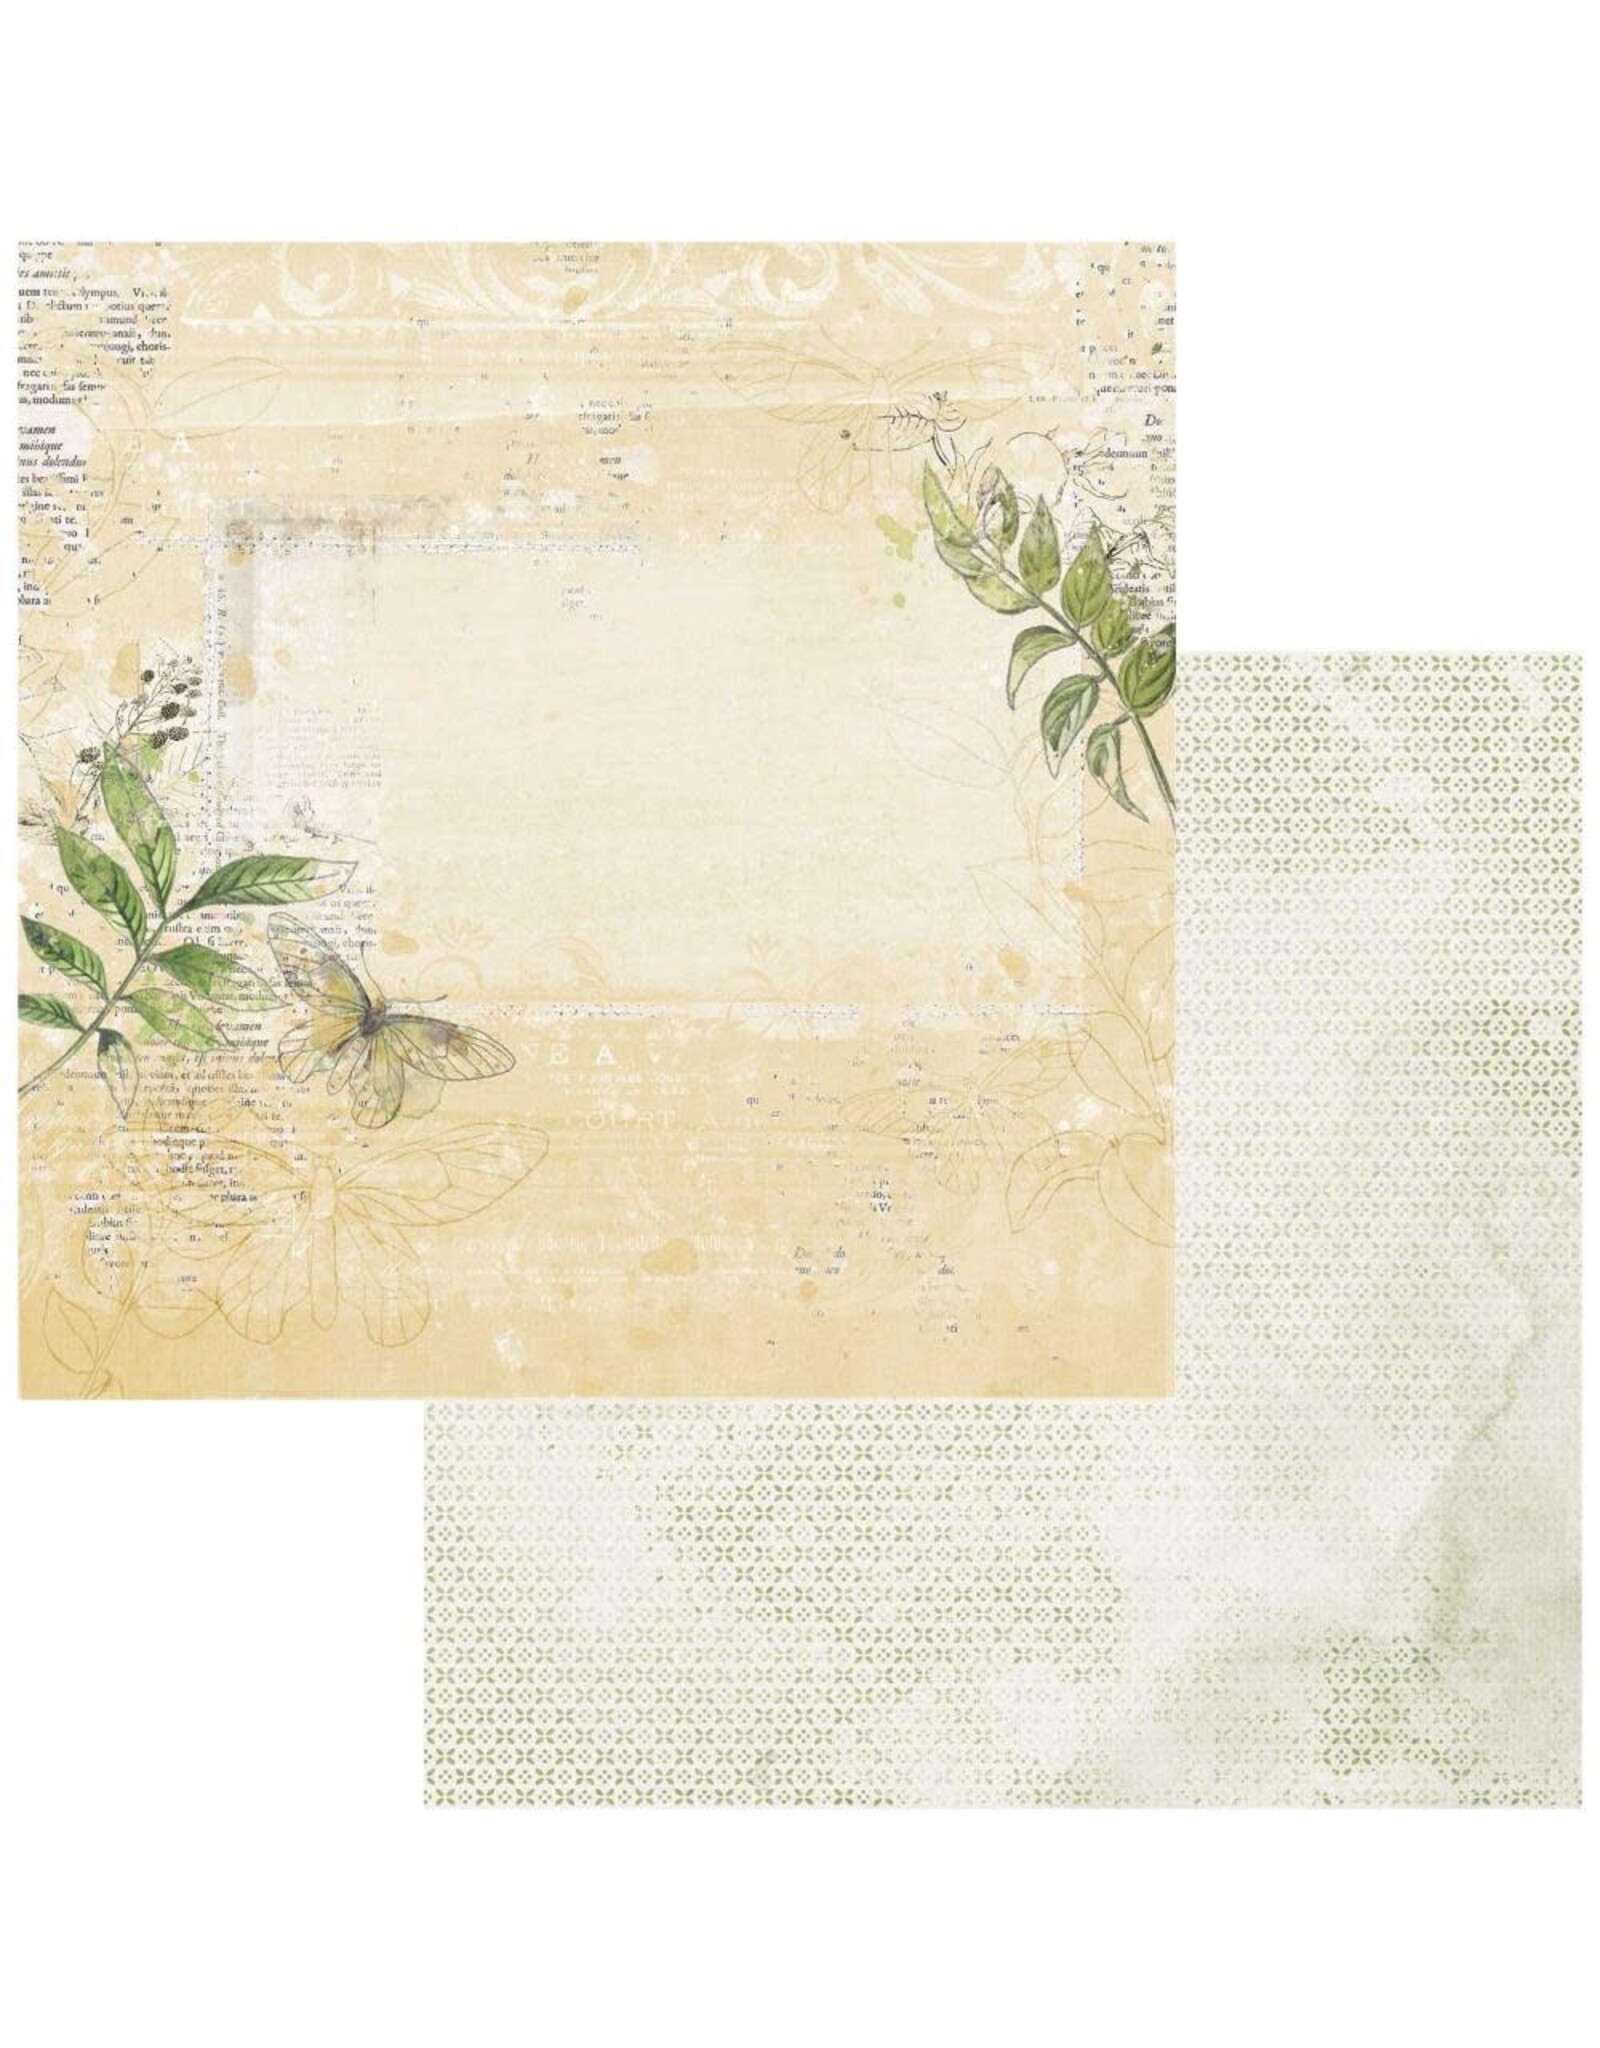 49 AND MARKET 49 AND MARKET VINTAGE ARTISTRY NATURE STUDY - OBSERVATIONS 12x12 CARDSTOCK